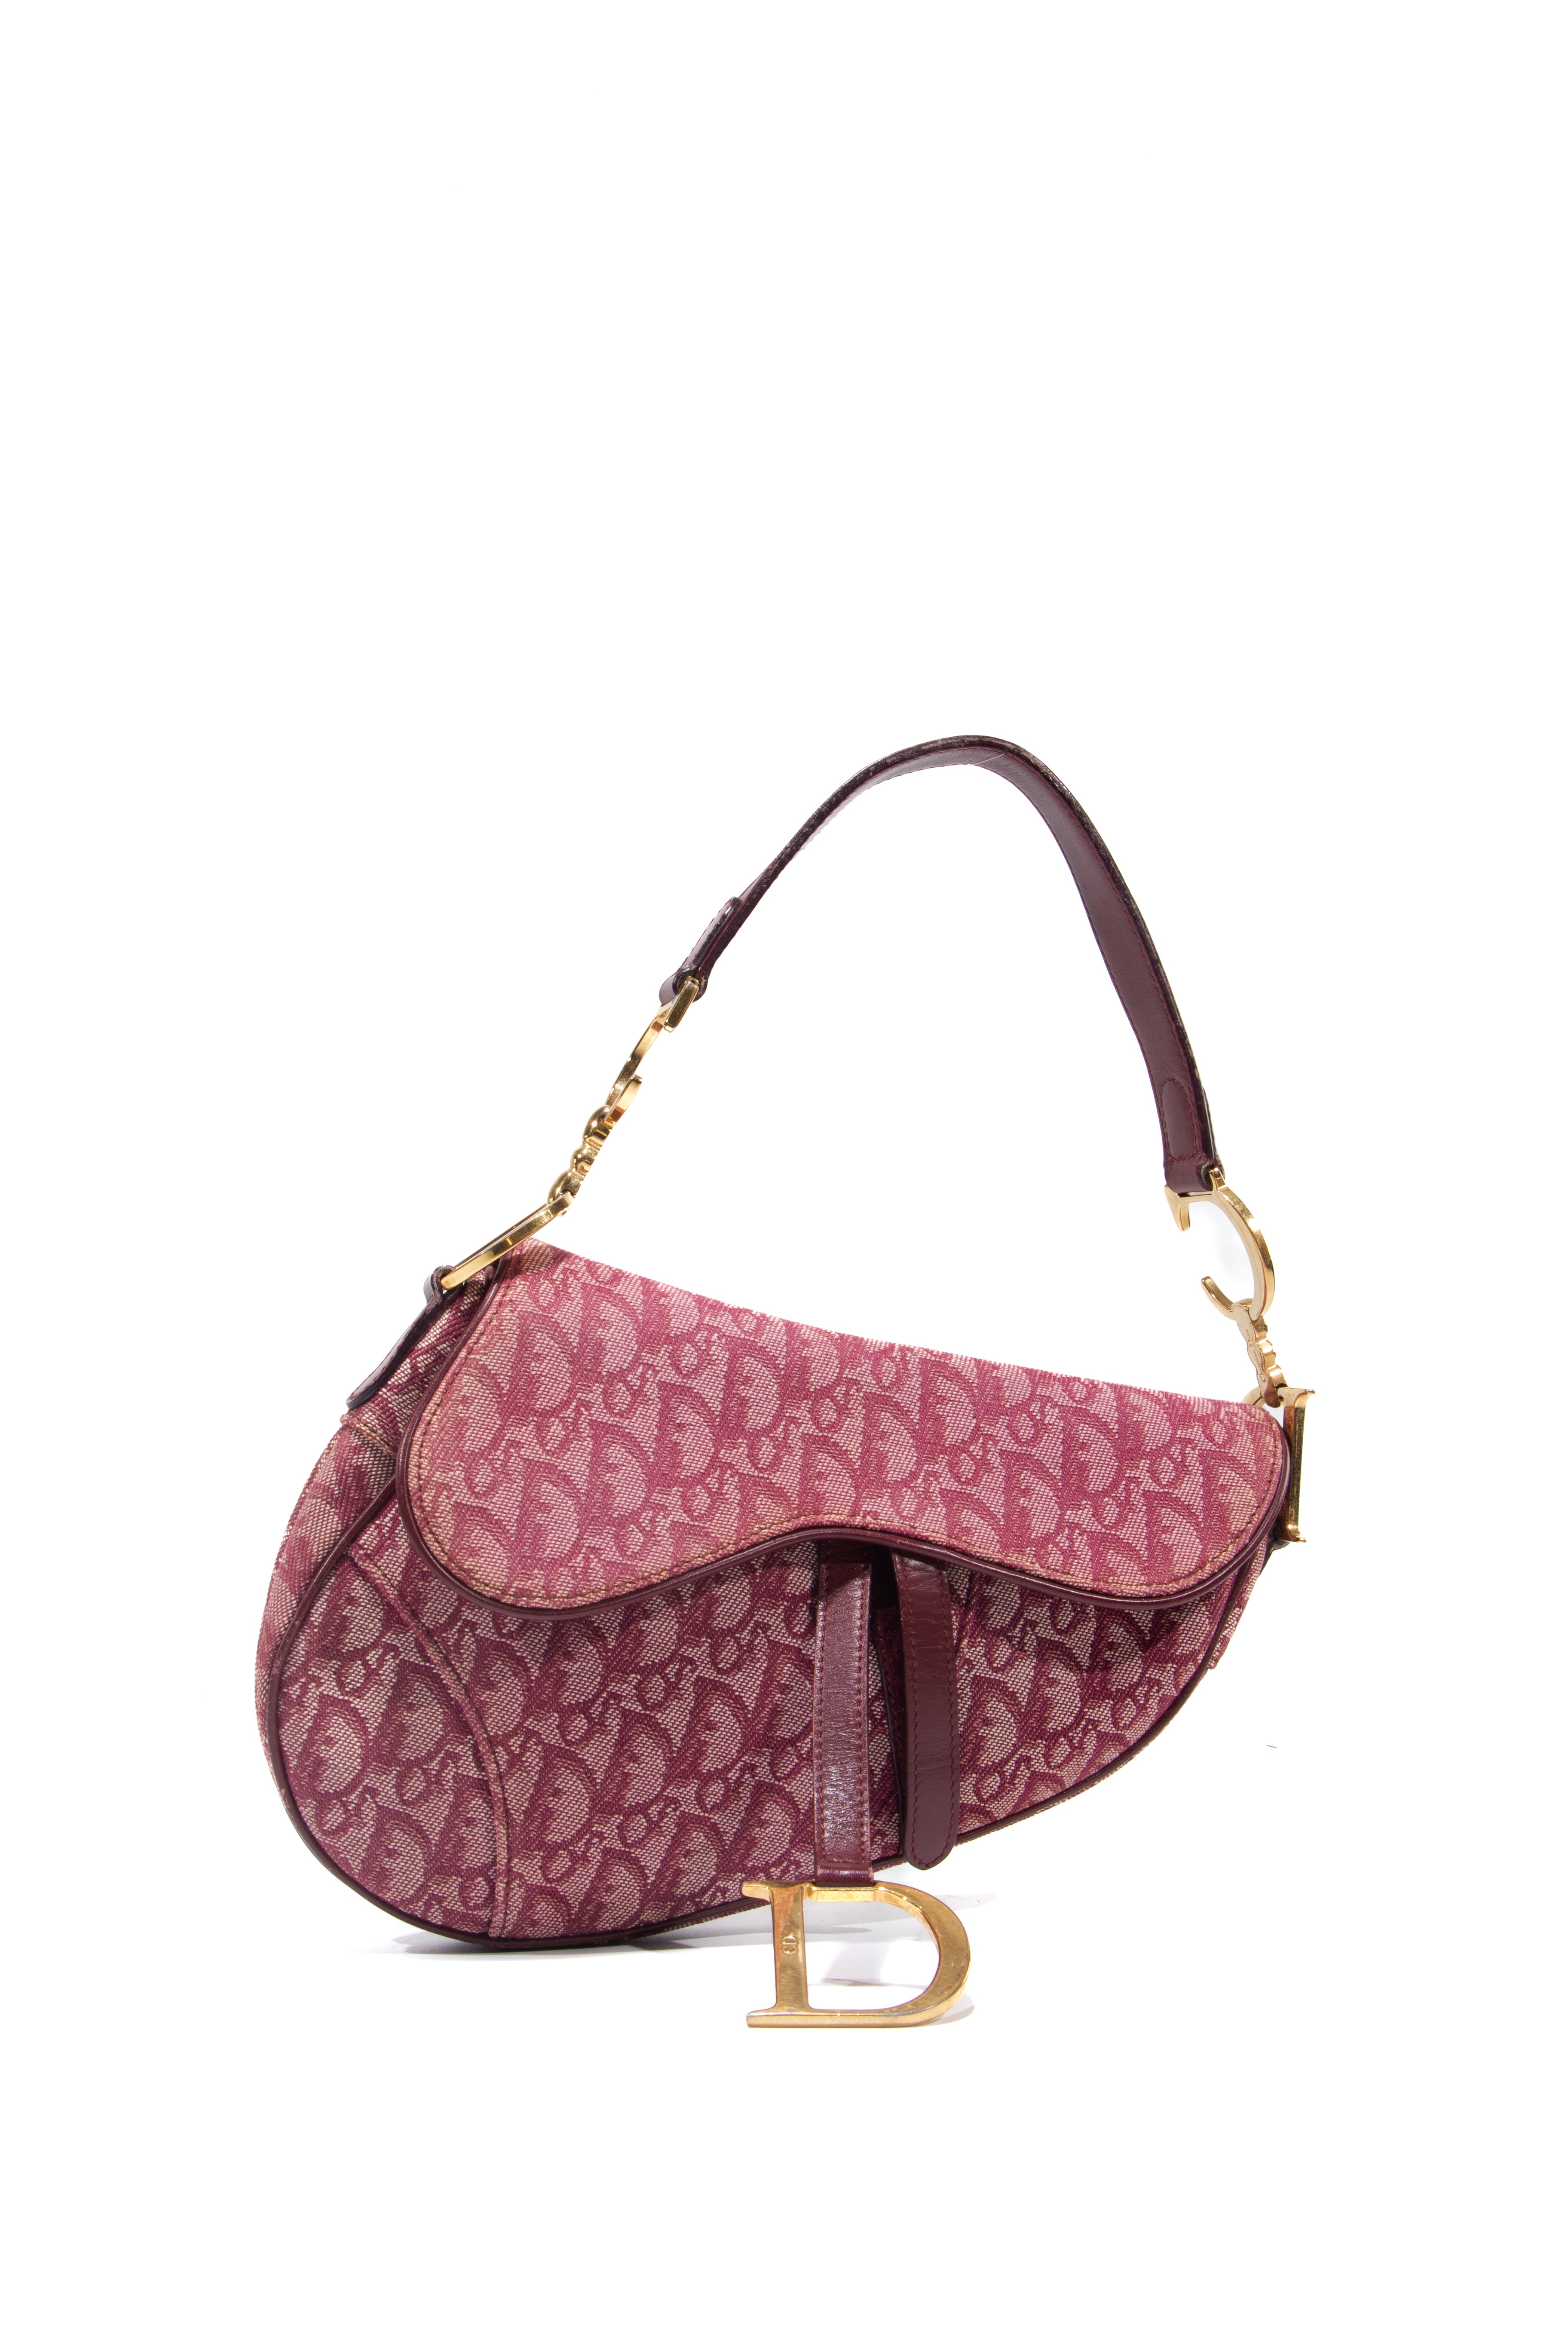 Christian Dior Bags - Find your next Christian Dior Bag at